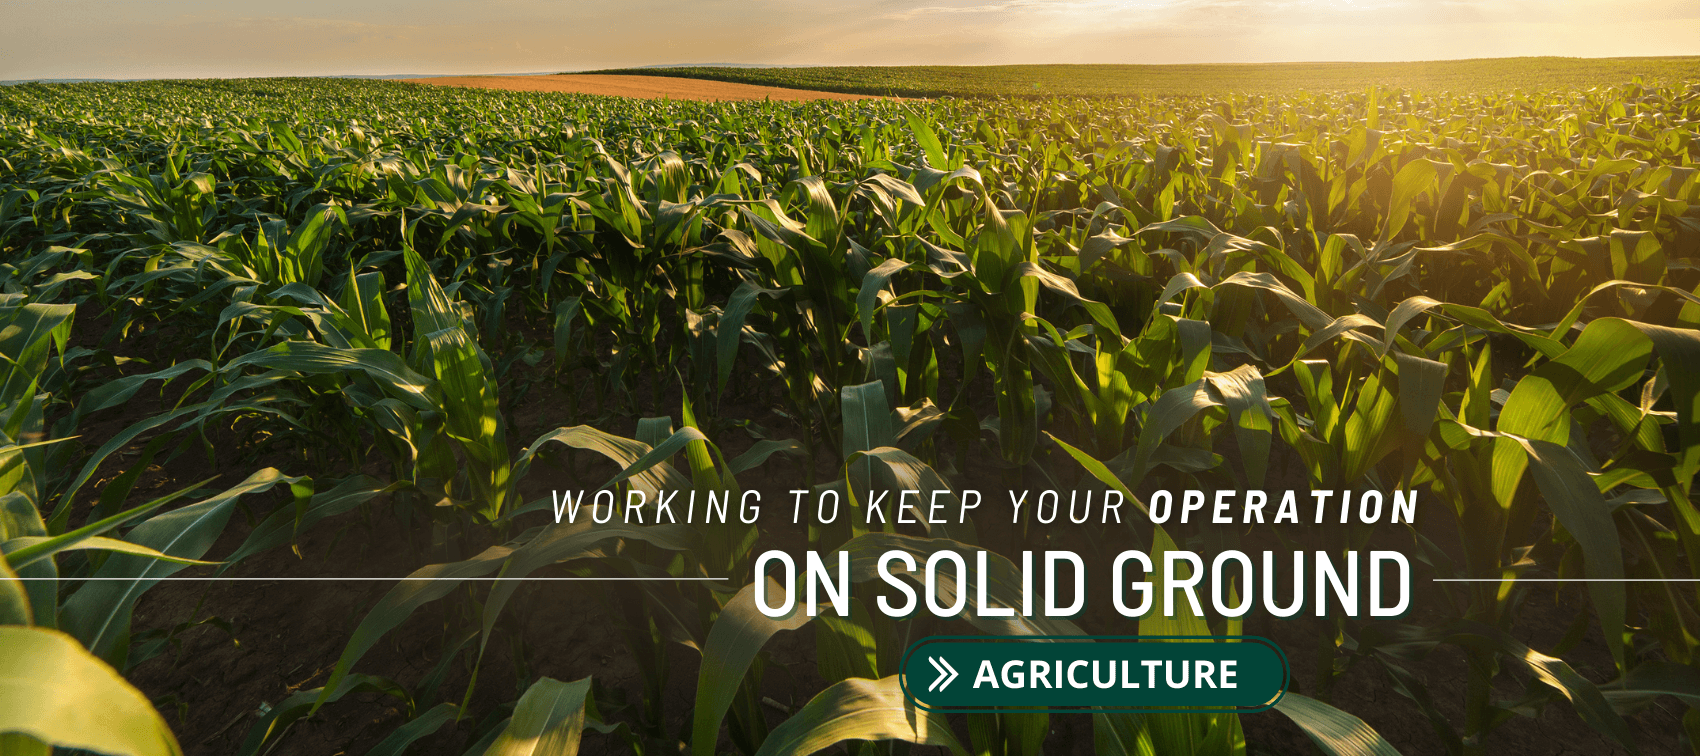 Working to keep your operation on solid ground. Agriculture